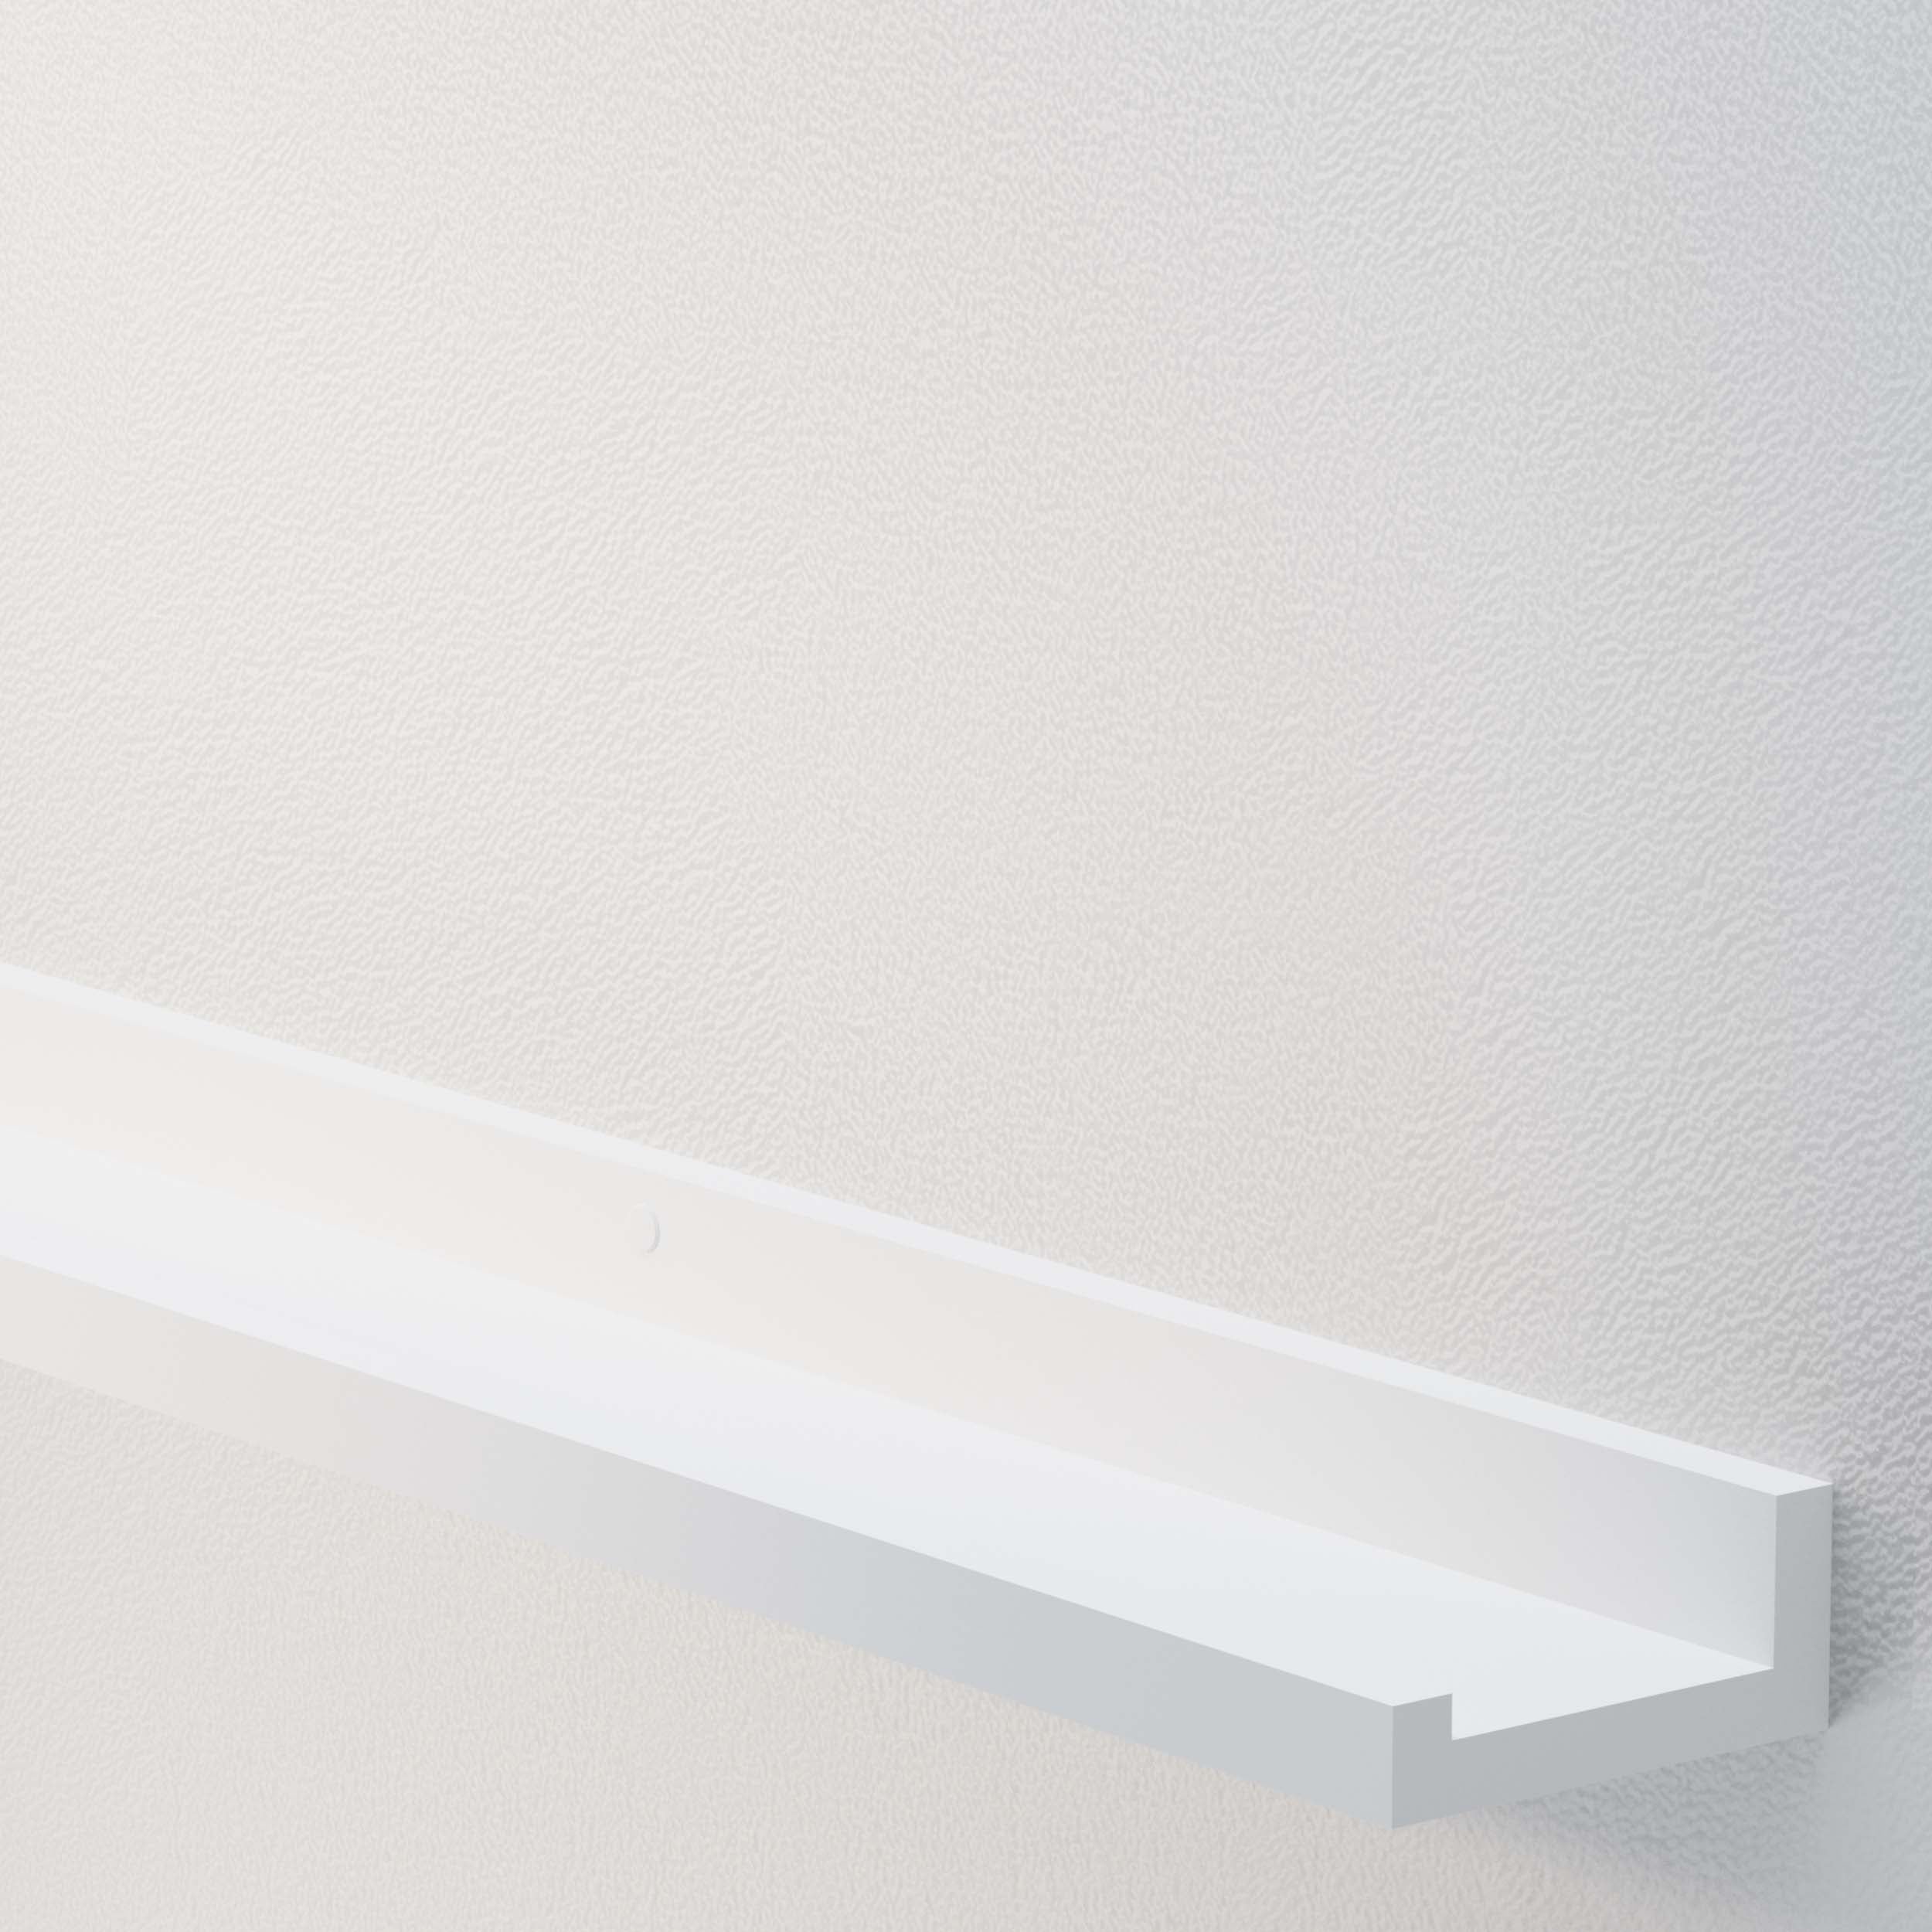 An empty white picture ledge shelf against a white textured wall.